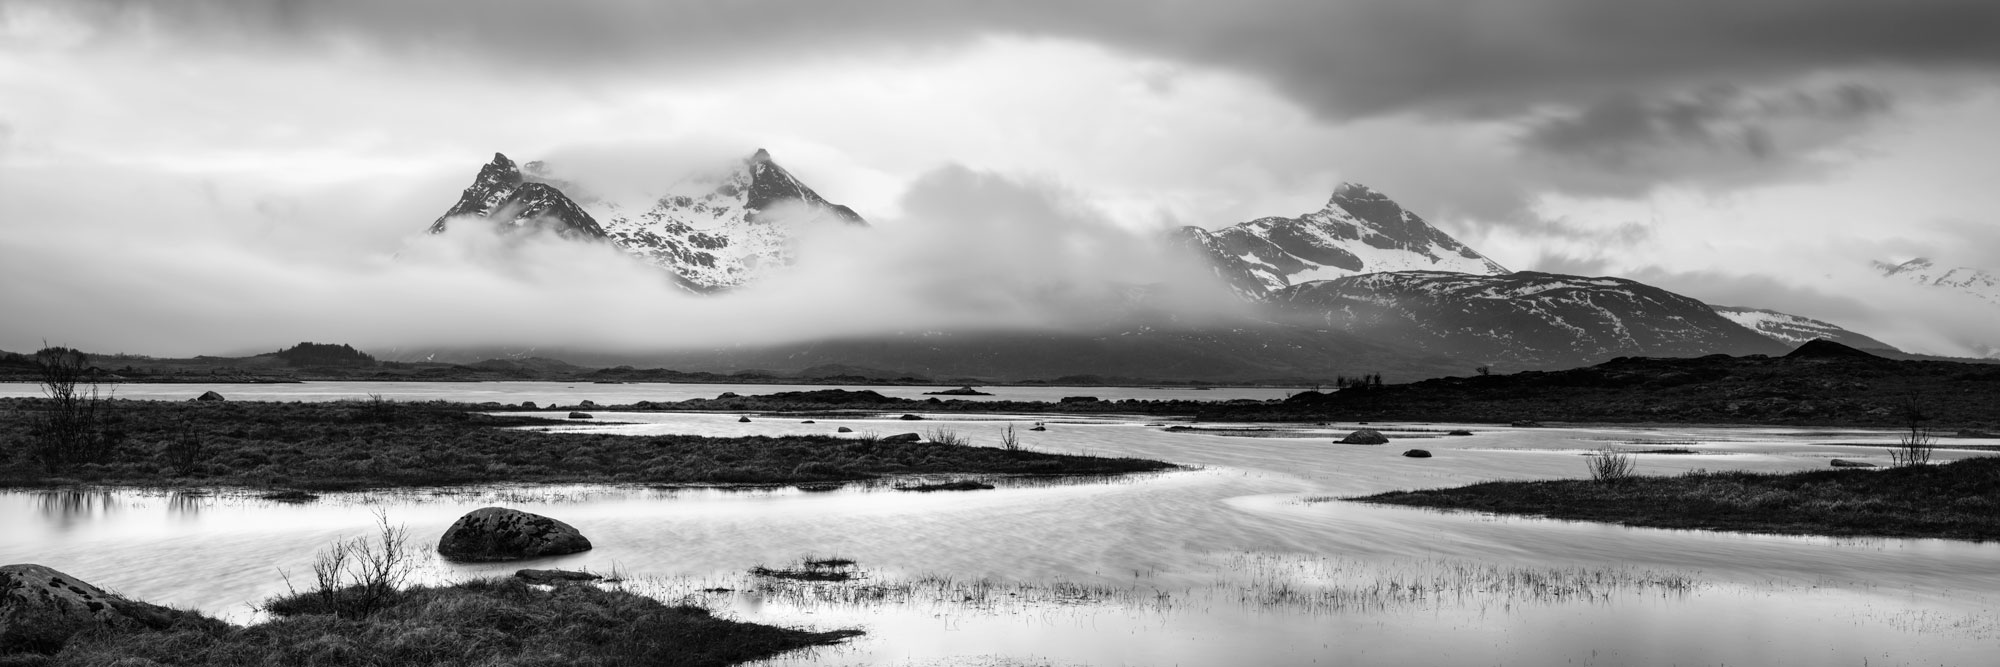 Monochrome panorama of the Lakes and Fjords of the Lofoten islands on a stormy day at the Gimsøymyrene nature preserve